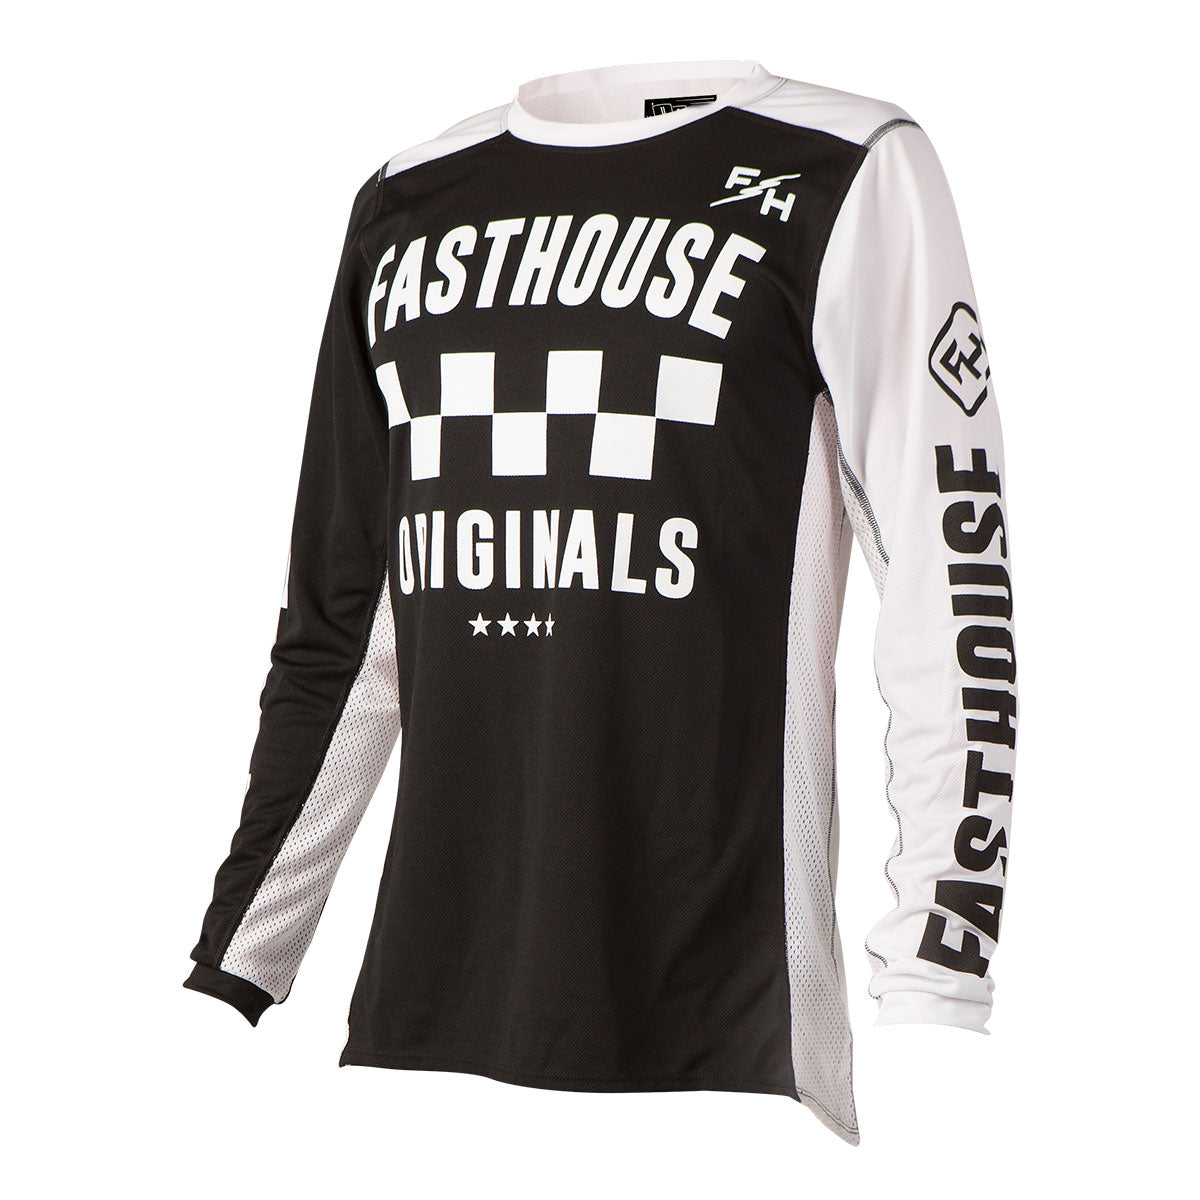 Fasthouse - Checkers OG Jersey - Black